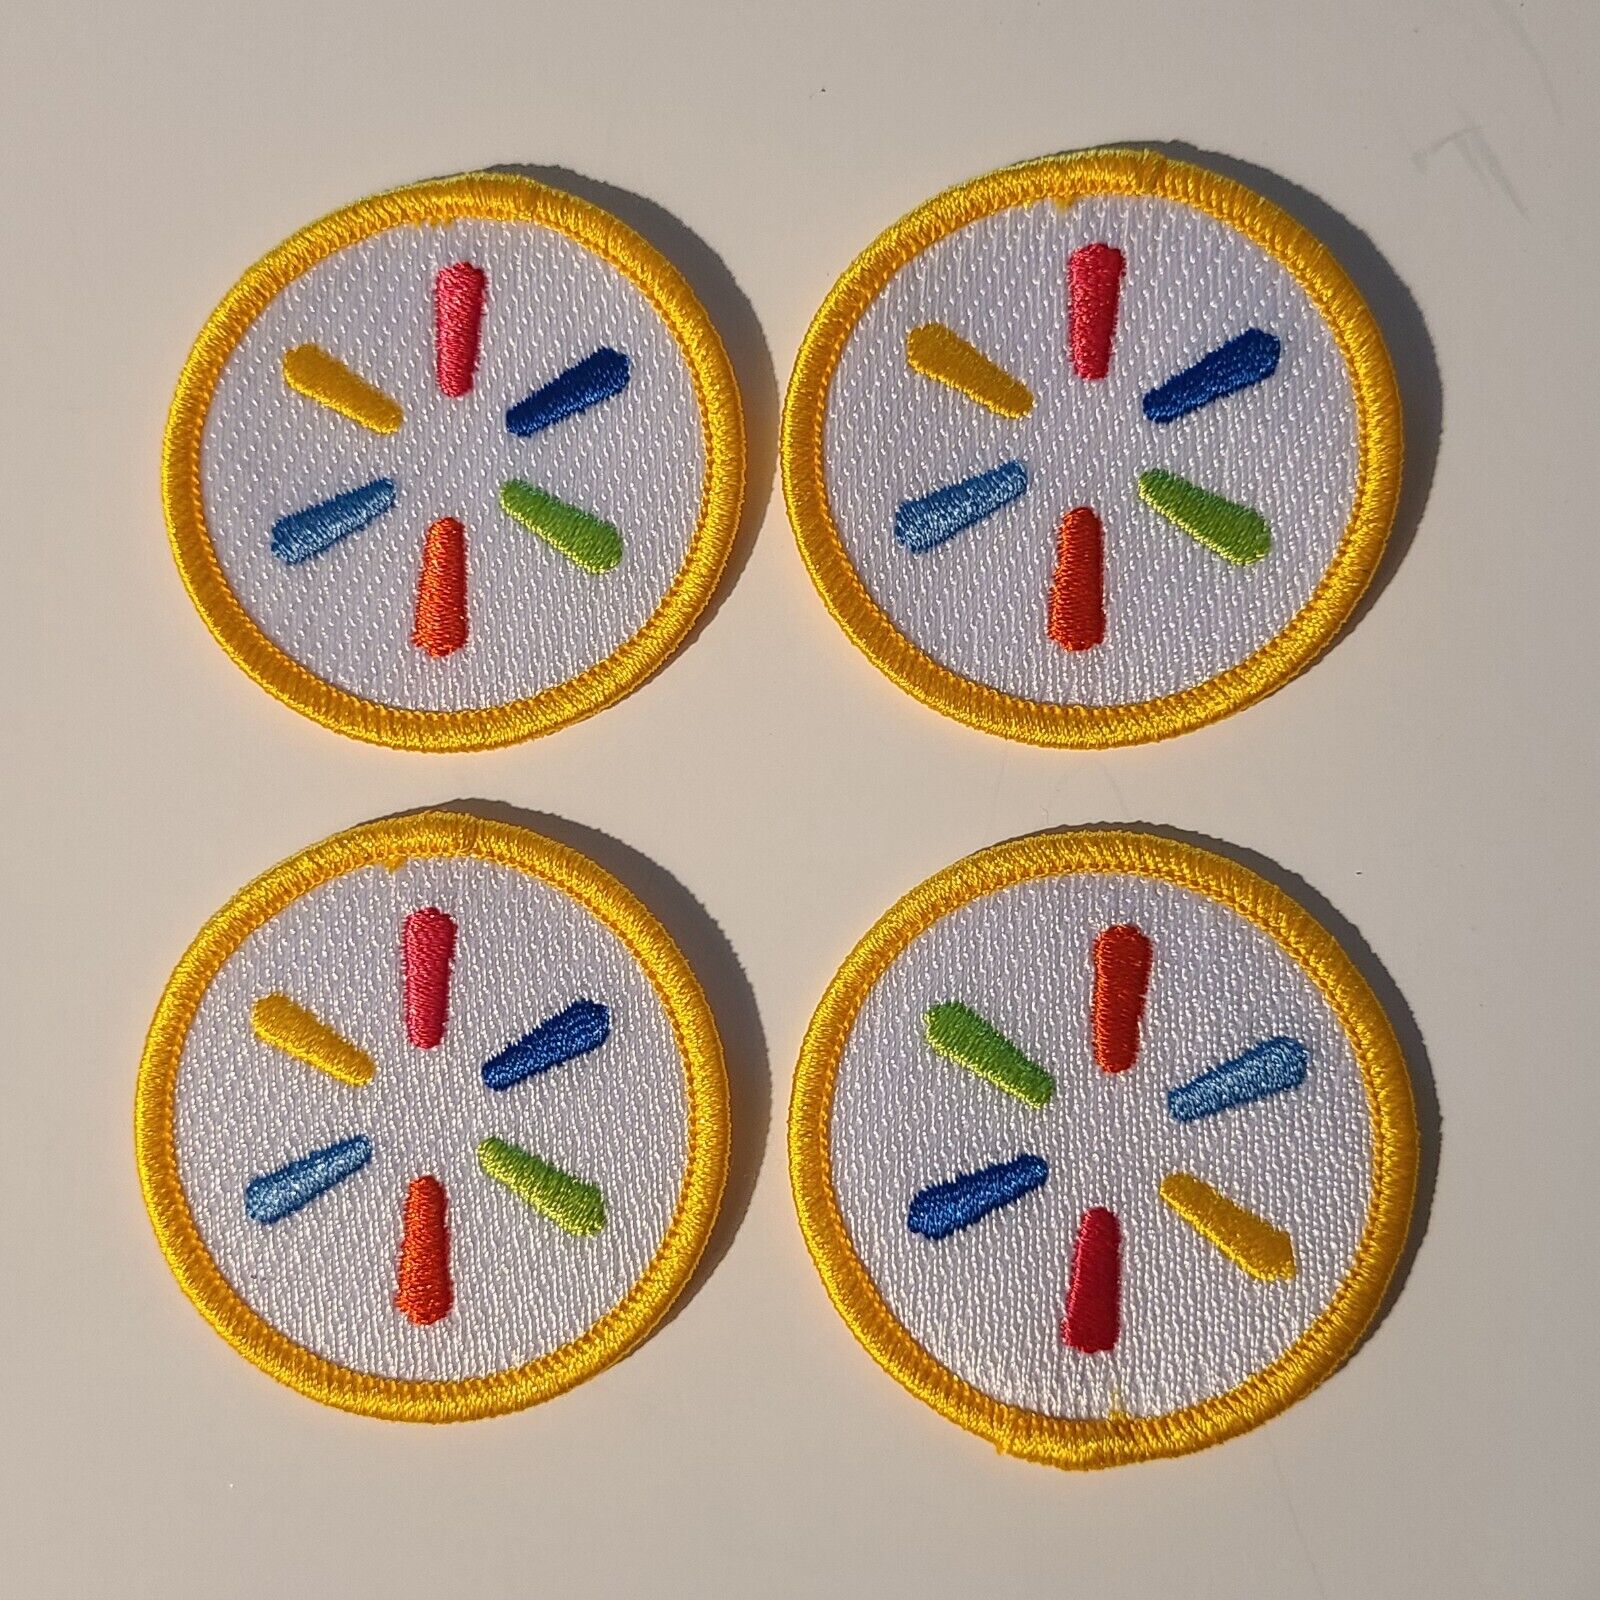 4 Pack Walmart Circular Patches New Advertising Decorative Promotional Pride